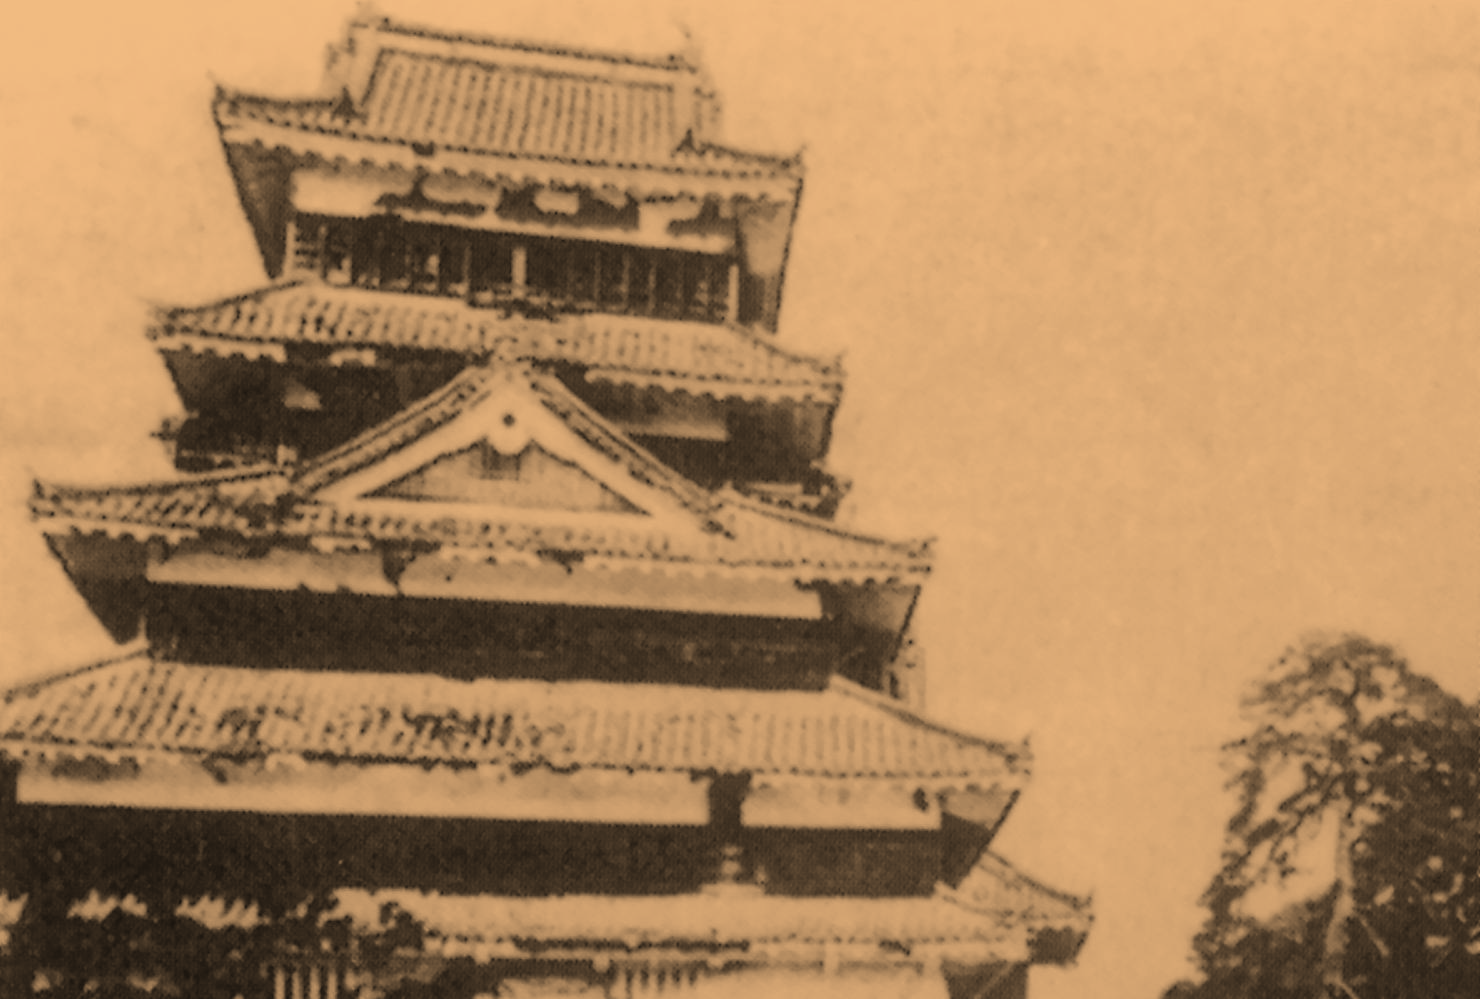 <p>In 1872, the castle was almost demolished as developers wanted the land to build housing complexes. </p>  <p>The locals protested the demolition, and the castle is now one of Japan’s national treasures. It’s also one of<strong> the last remaining daimyo castles </strong>in the country.</p>